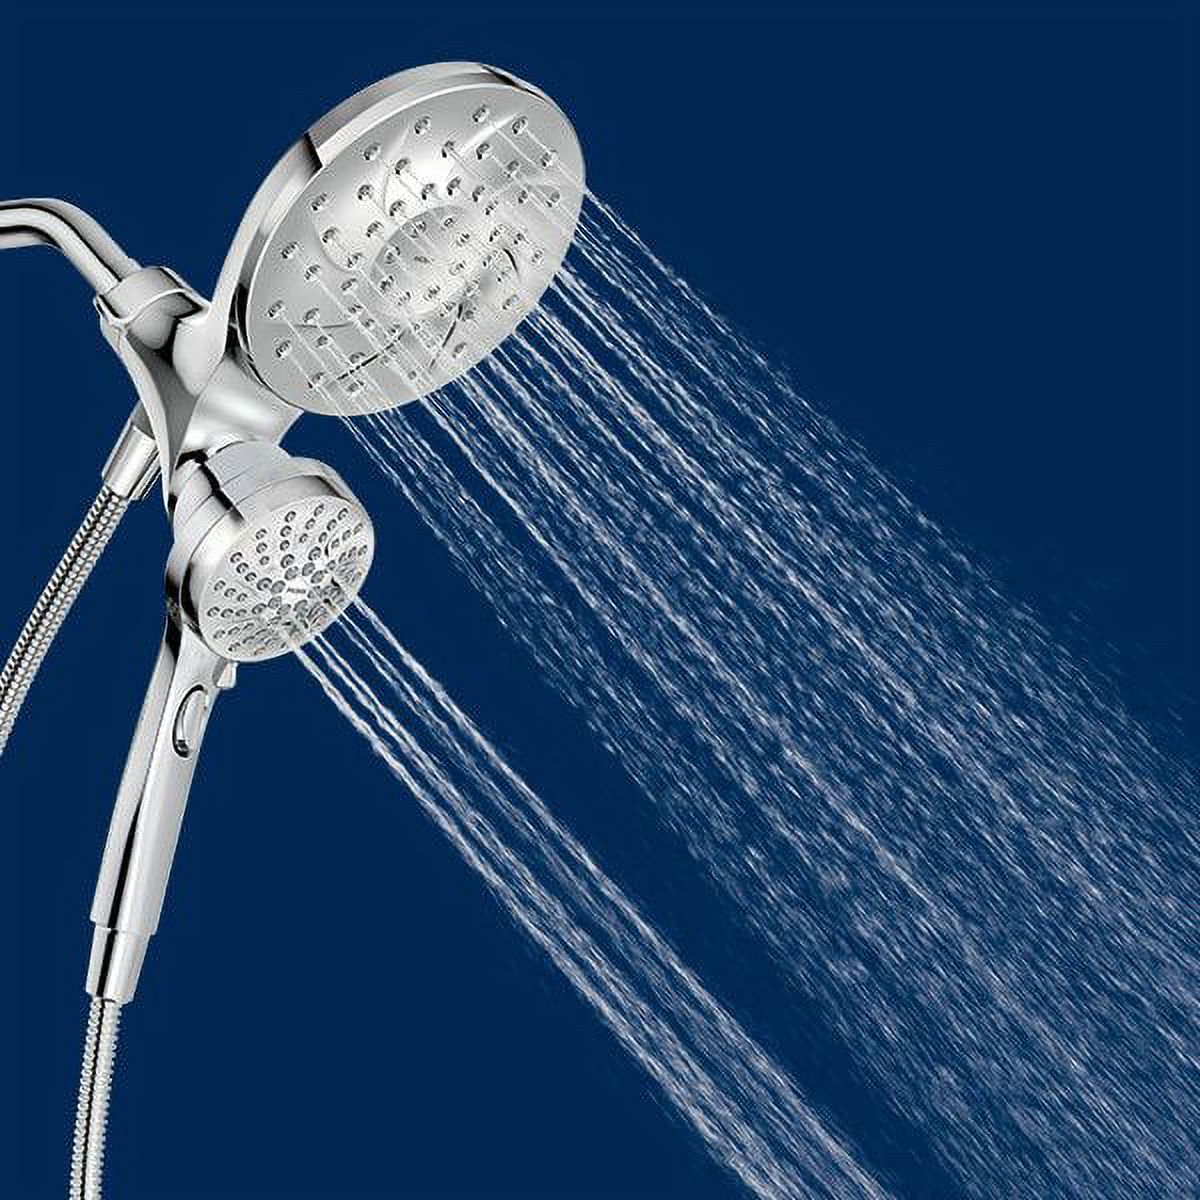 Moen Engage Magnetic 6.5" 6-Function Bathroom Handheld Showerhead with Magnetic Docking, Chrome - image 4 of 29